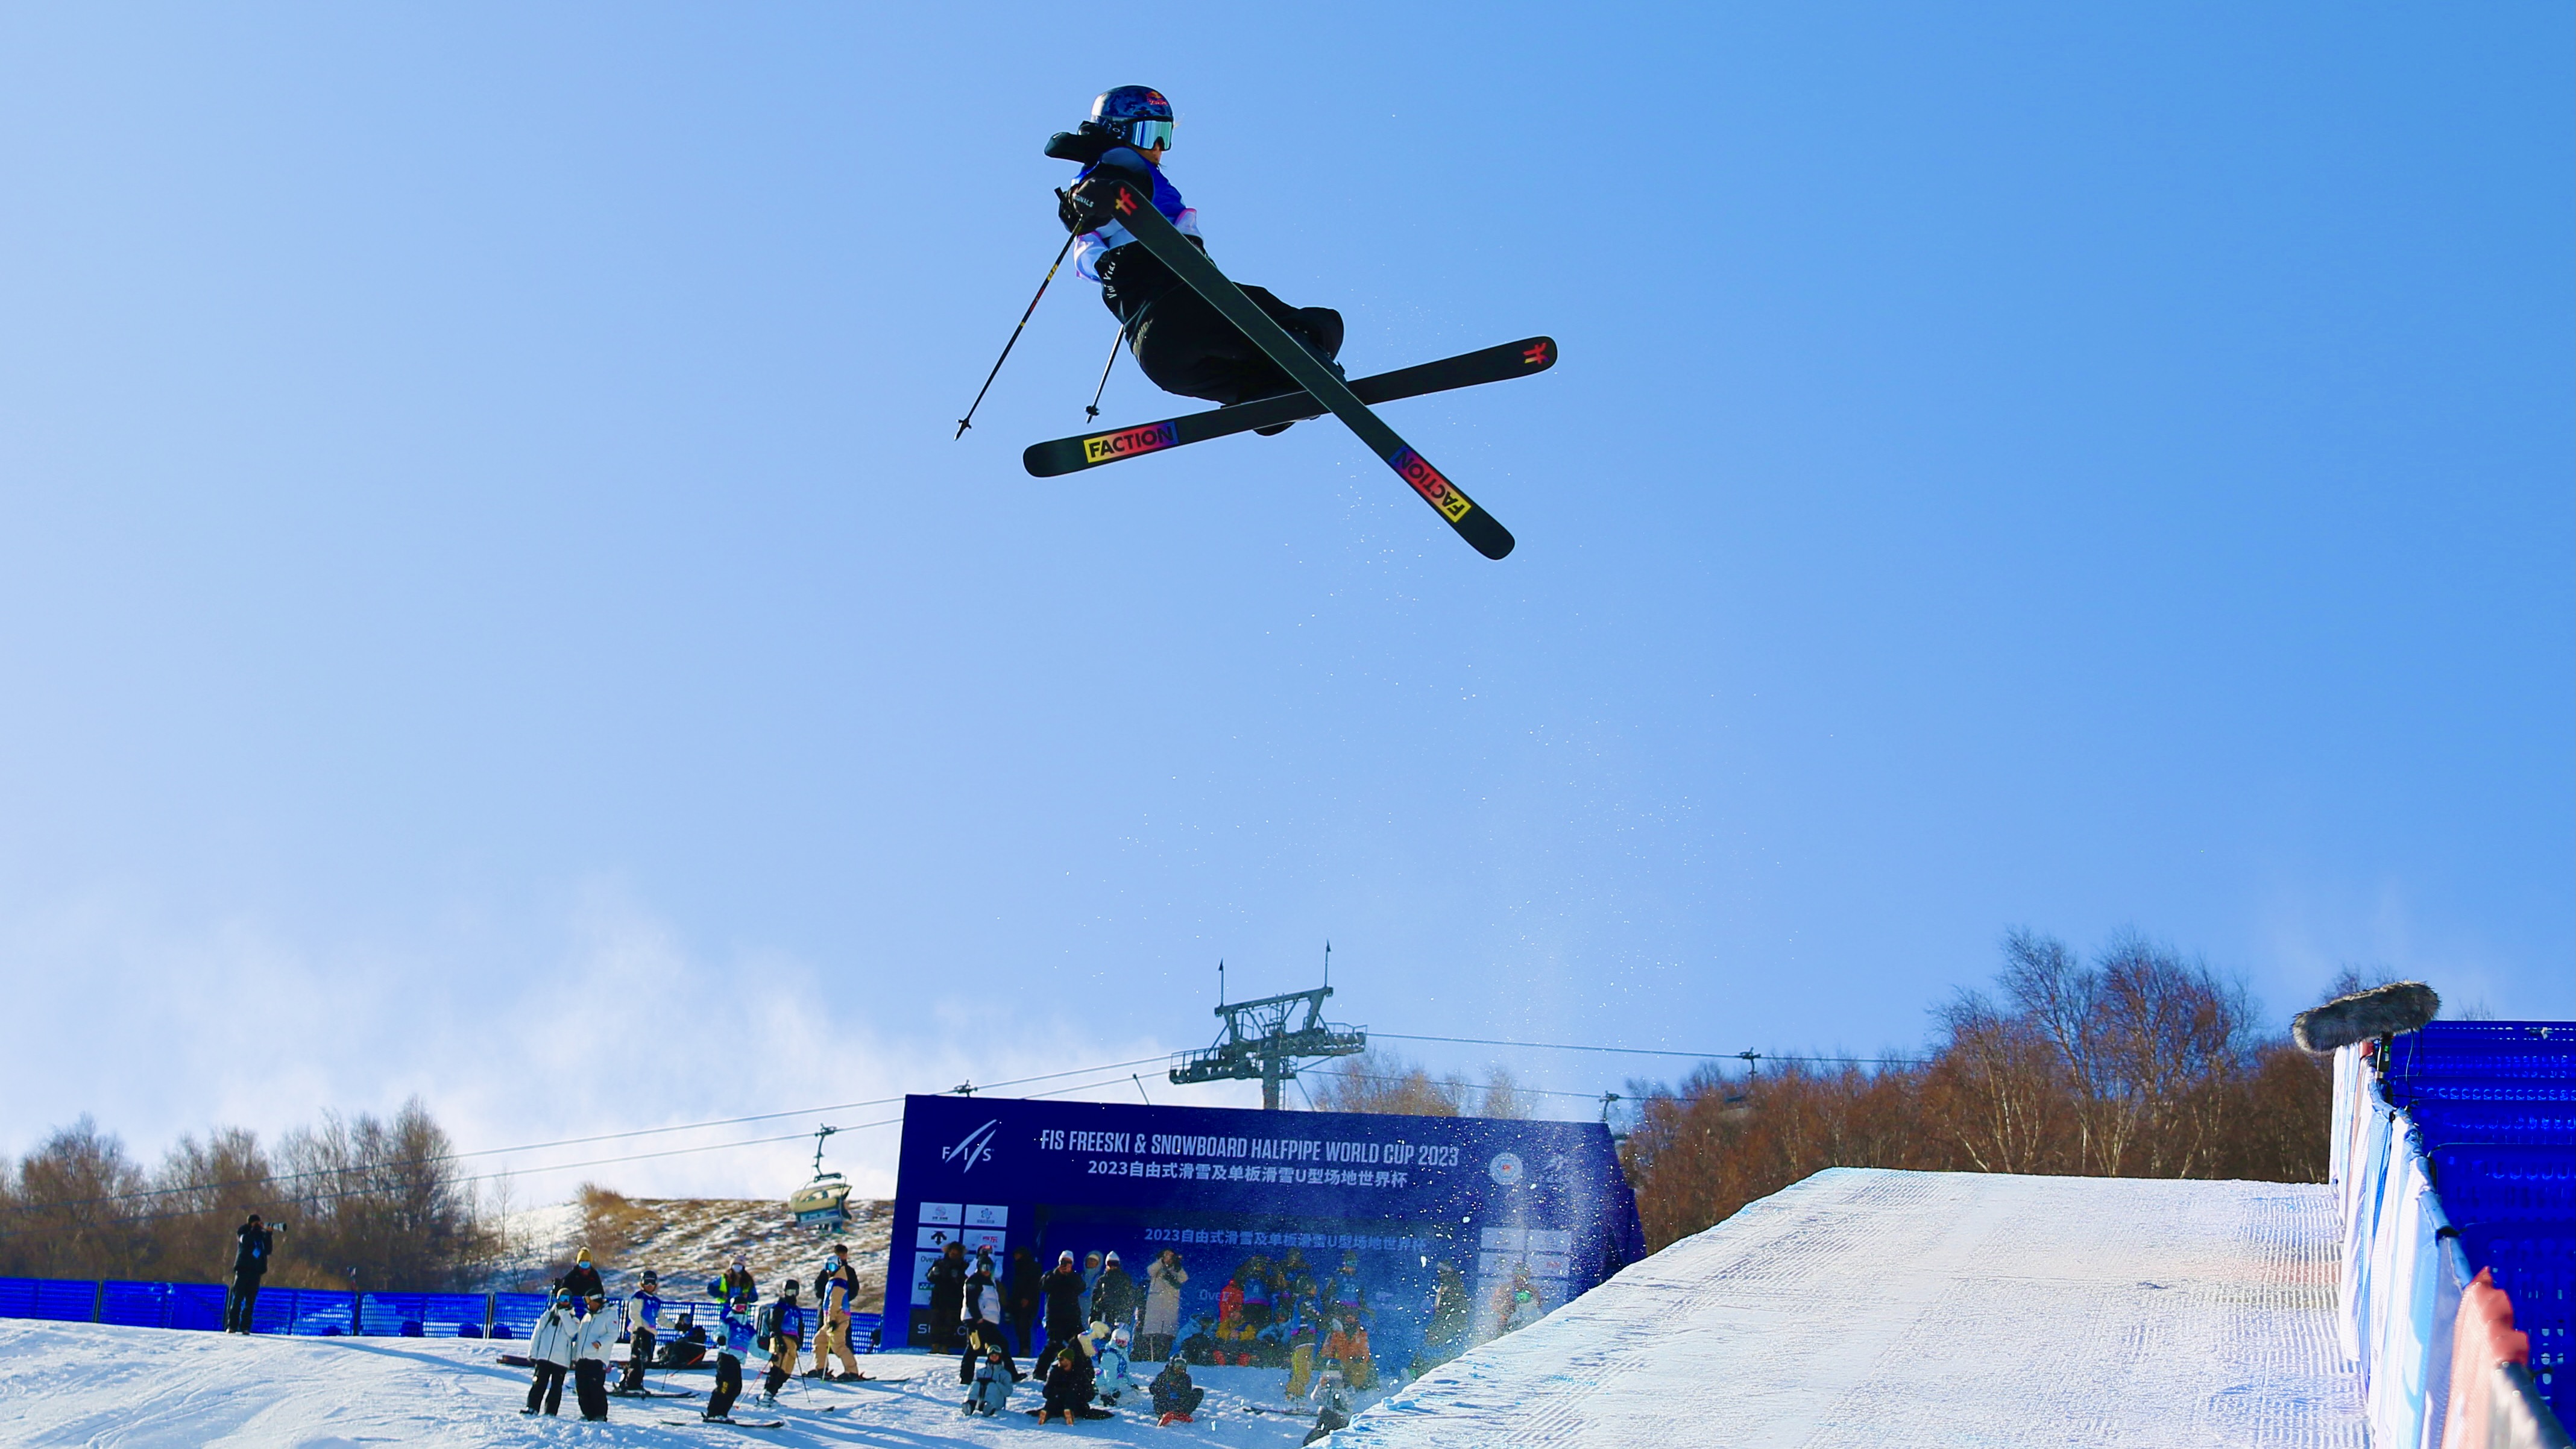 FIS | Halfpipe World Cup season preview 2023/24